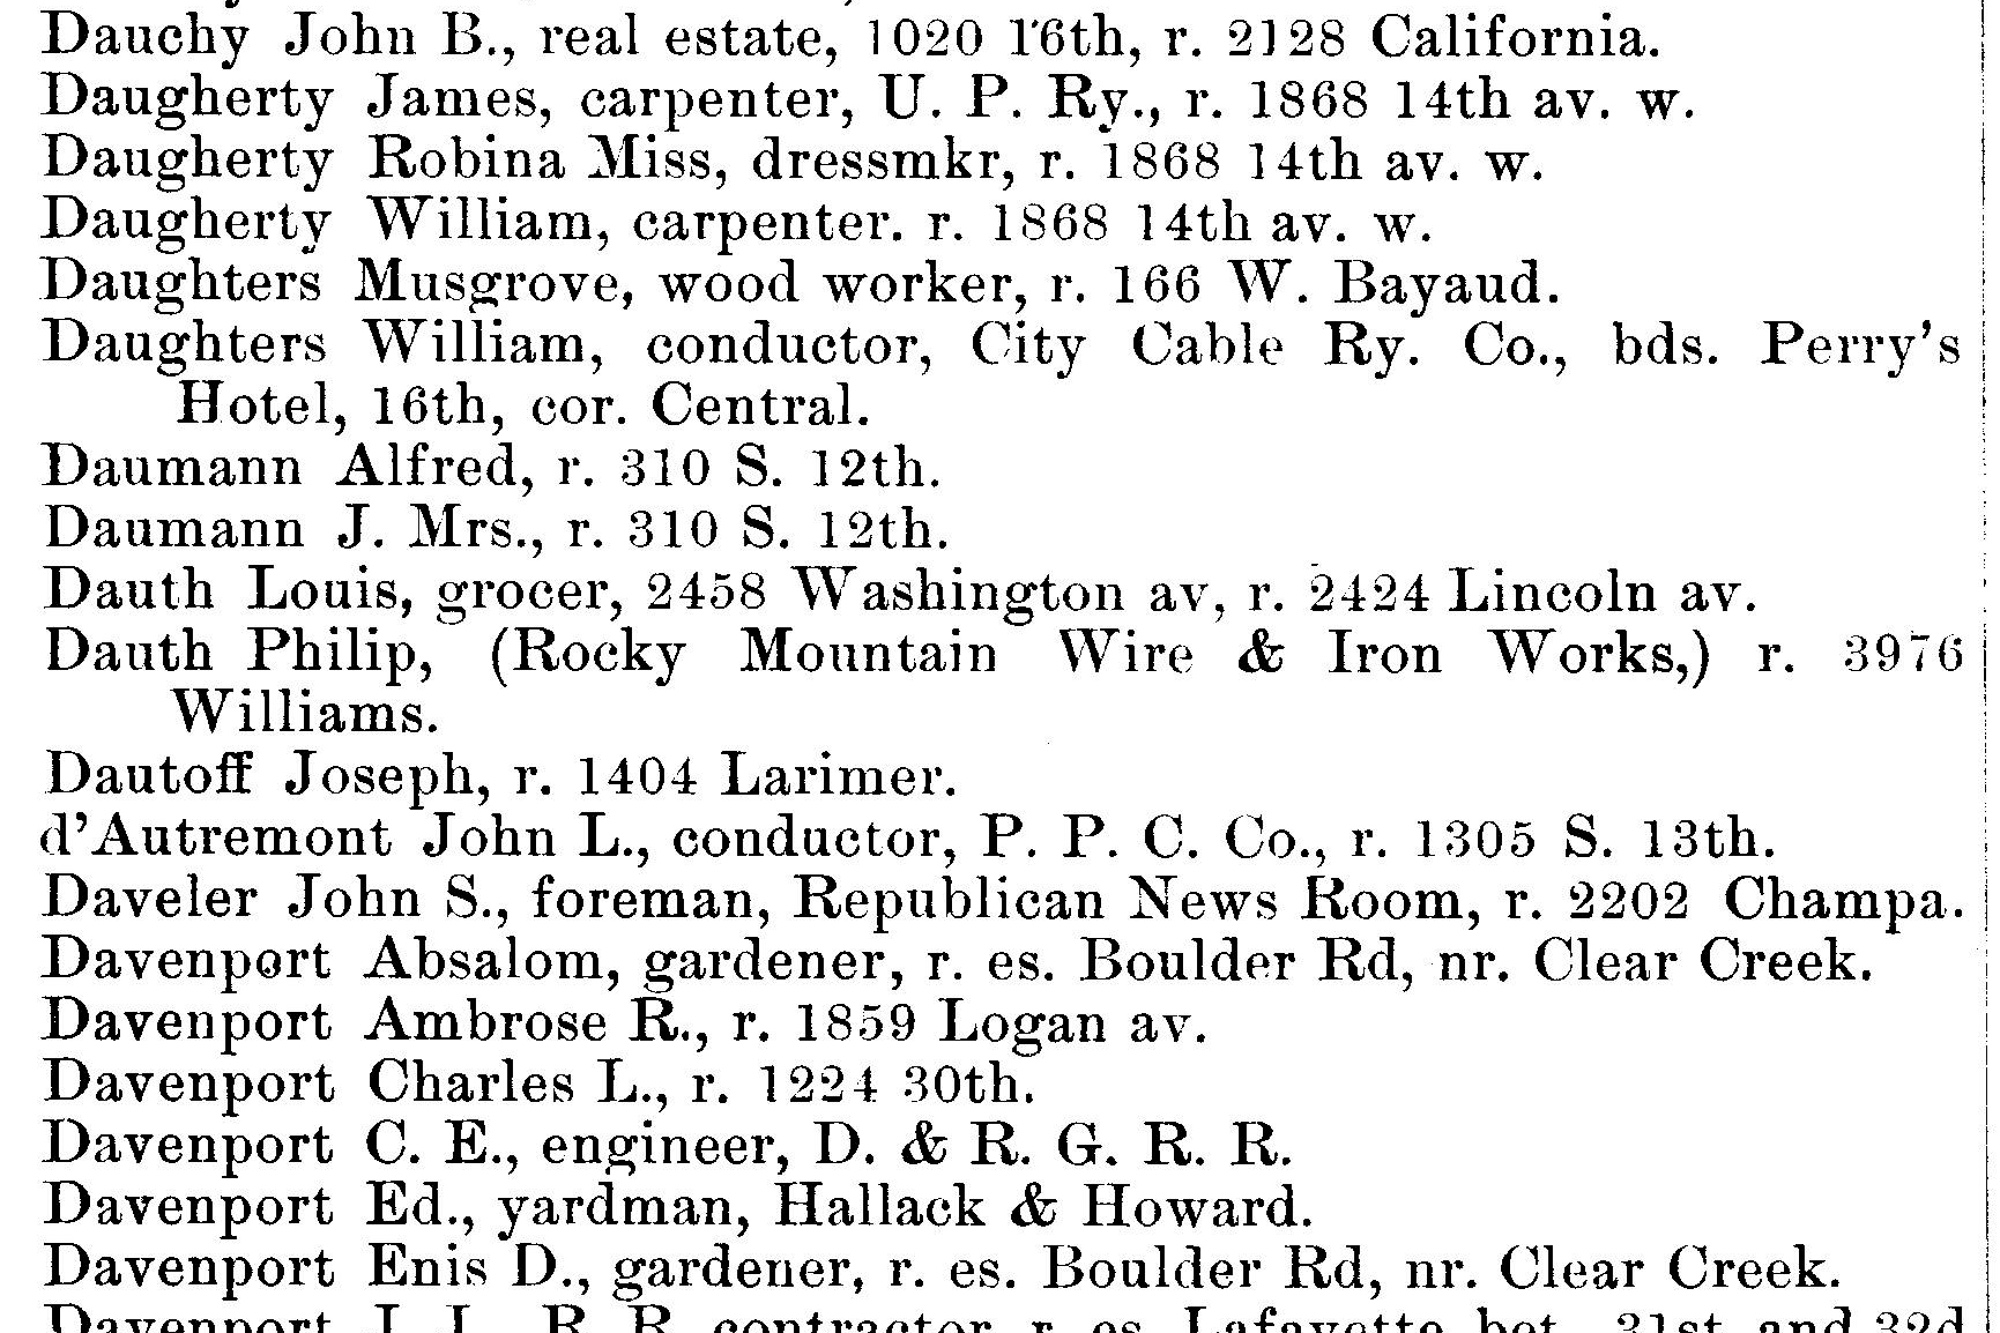 Dauth Family Archive - 1890 - Denver Directory - Entry For Louis and Phillip Dauth